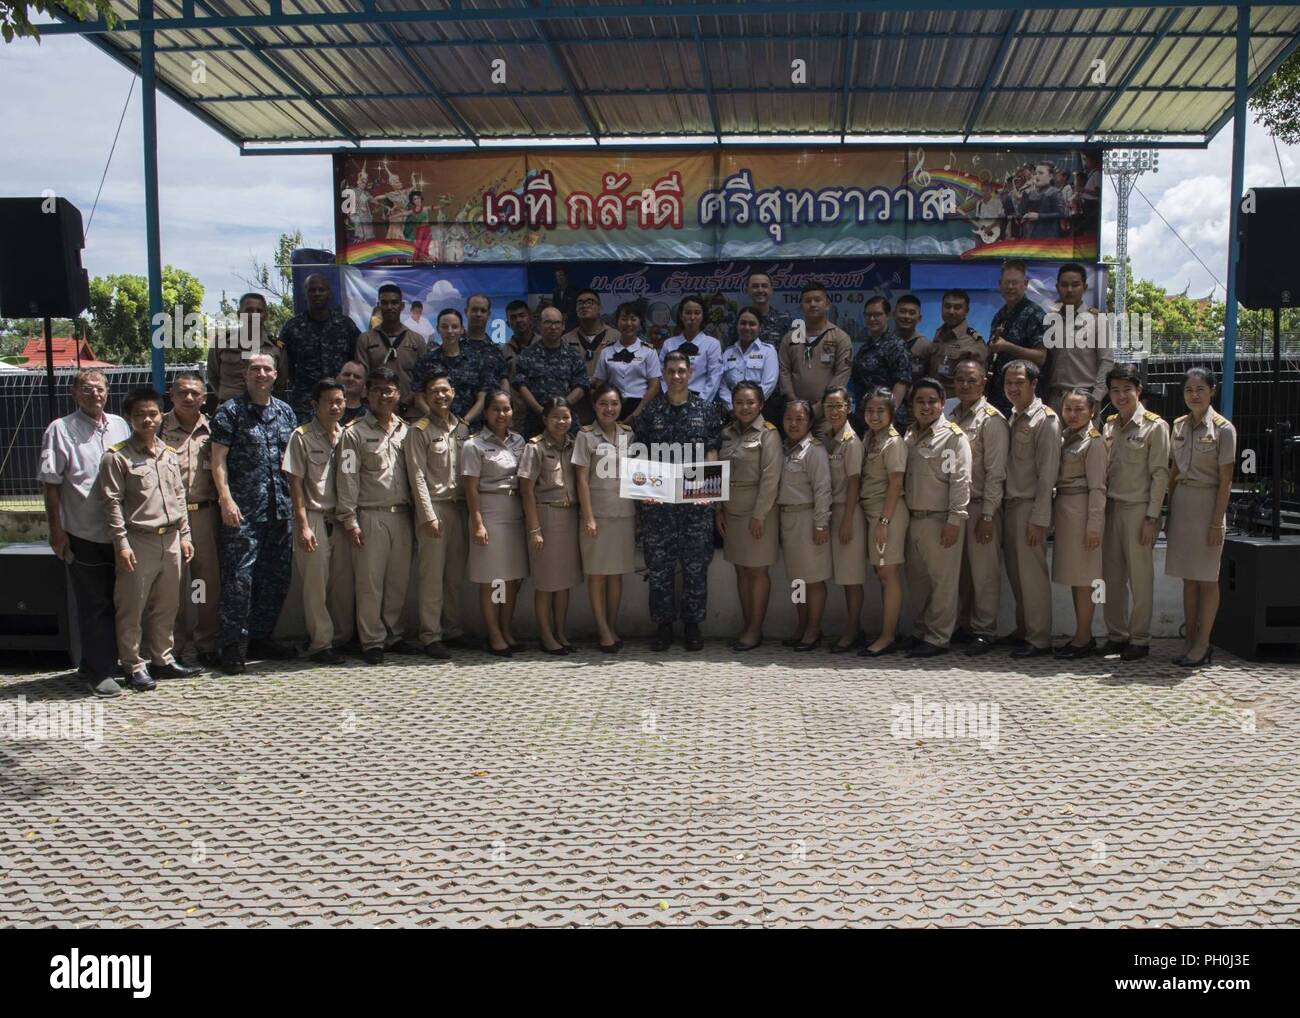 Thailand (June 14, 2018) - The 7th Fleet Band, the Royal Thai Navy Band and and Thai government officials pose for a group following a group performance at the Wat Sutthawat School in support of Cooperation Afloat Readiness and Training (CARAT) Thailand 2018. The CARAT exercise series, in its 24th iteration, highlights the skill and will of regional partners to cooperatively work together towards the common goal of ensuring a secure and stable maritime environment. Stock Photo